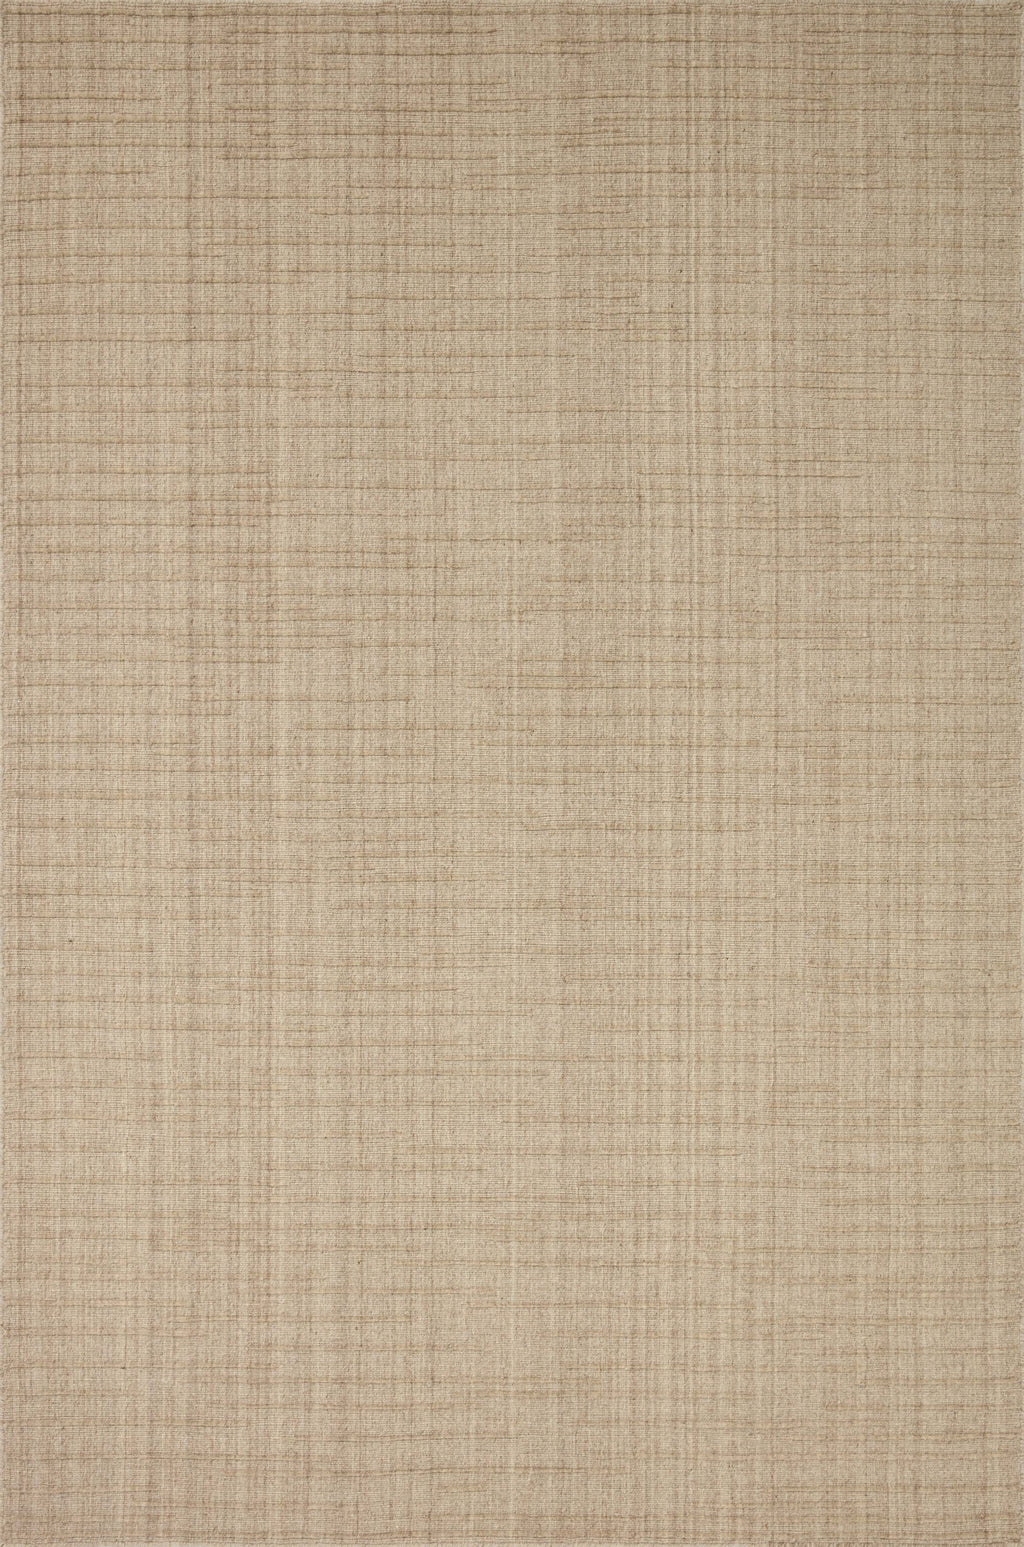 Brooks Collection Wool/Viscose Rug  in  Oatmeal Brown Accent Hand-Woven Wool/Viscose